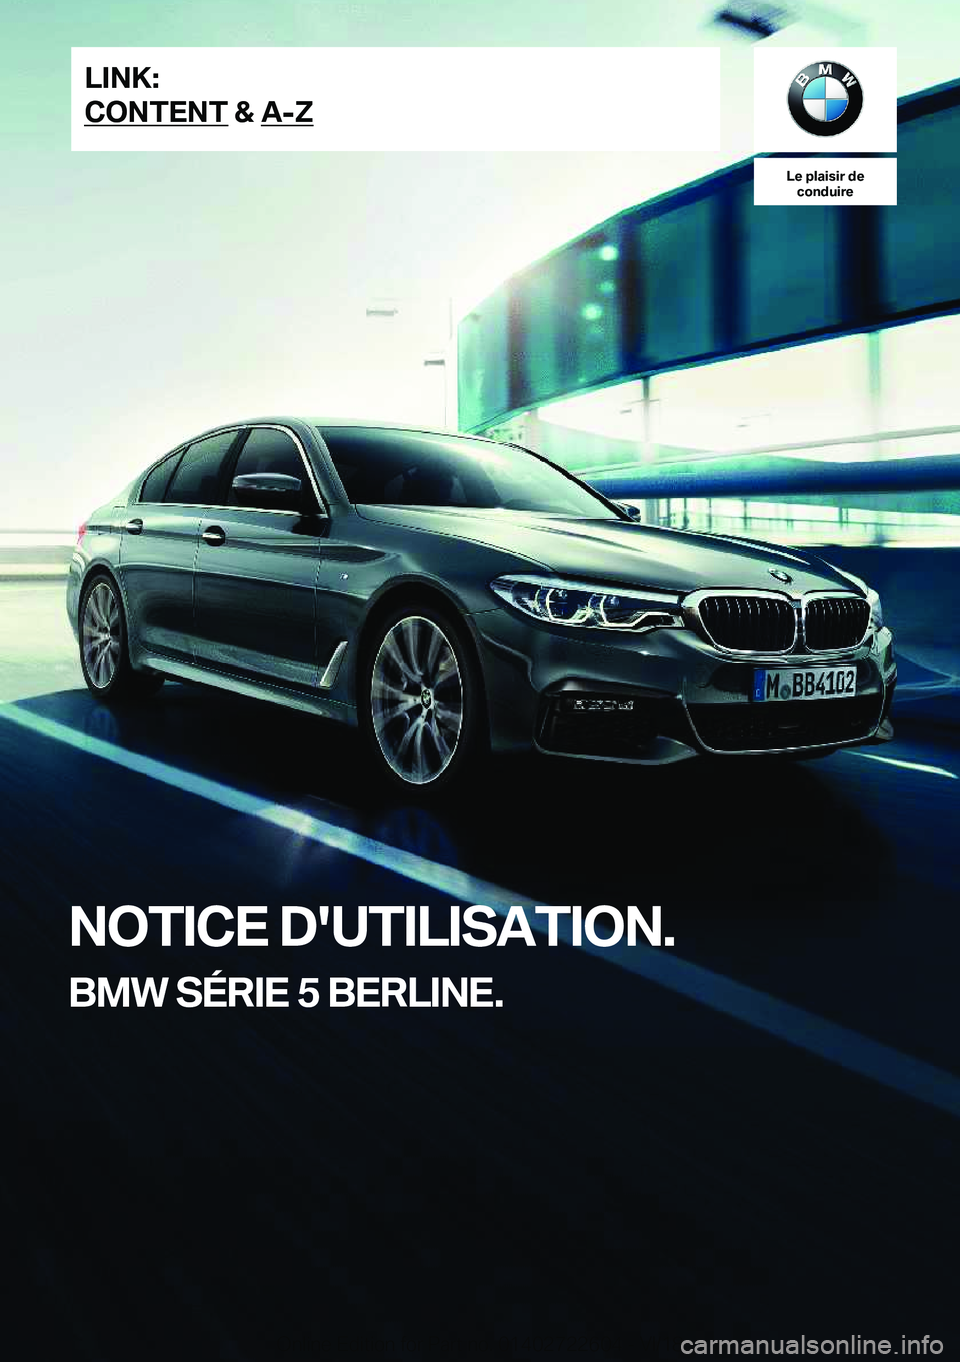 BMW 5 SERIES 2019  Notices Demploi (in French) �L�e��p�l�a�i�s�i�r��d�e�c�o�n�d�u�i�r�e
�N�O�T�I�C�E��D�'�U�T�I�L�I�S�A�T�I�O�N�.
�B�M�W��S�É�R�I�E��5��B�E�R�L�I�N�E�.�L�I�N�K�:
�C�O�N�T�E�N�T��&��A�-�Z�O�n�l�i�n�e��E�d�i�t�i�o�n��f